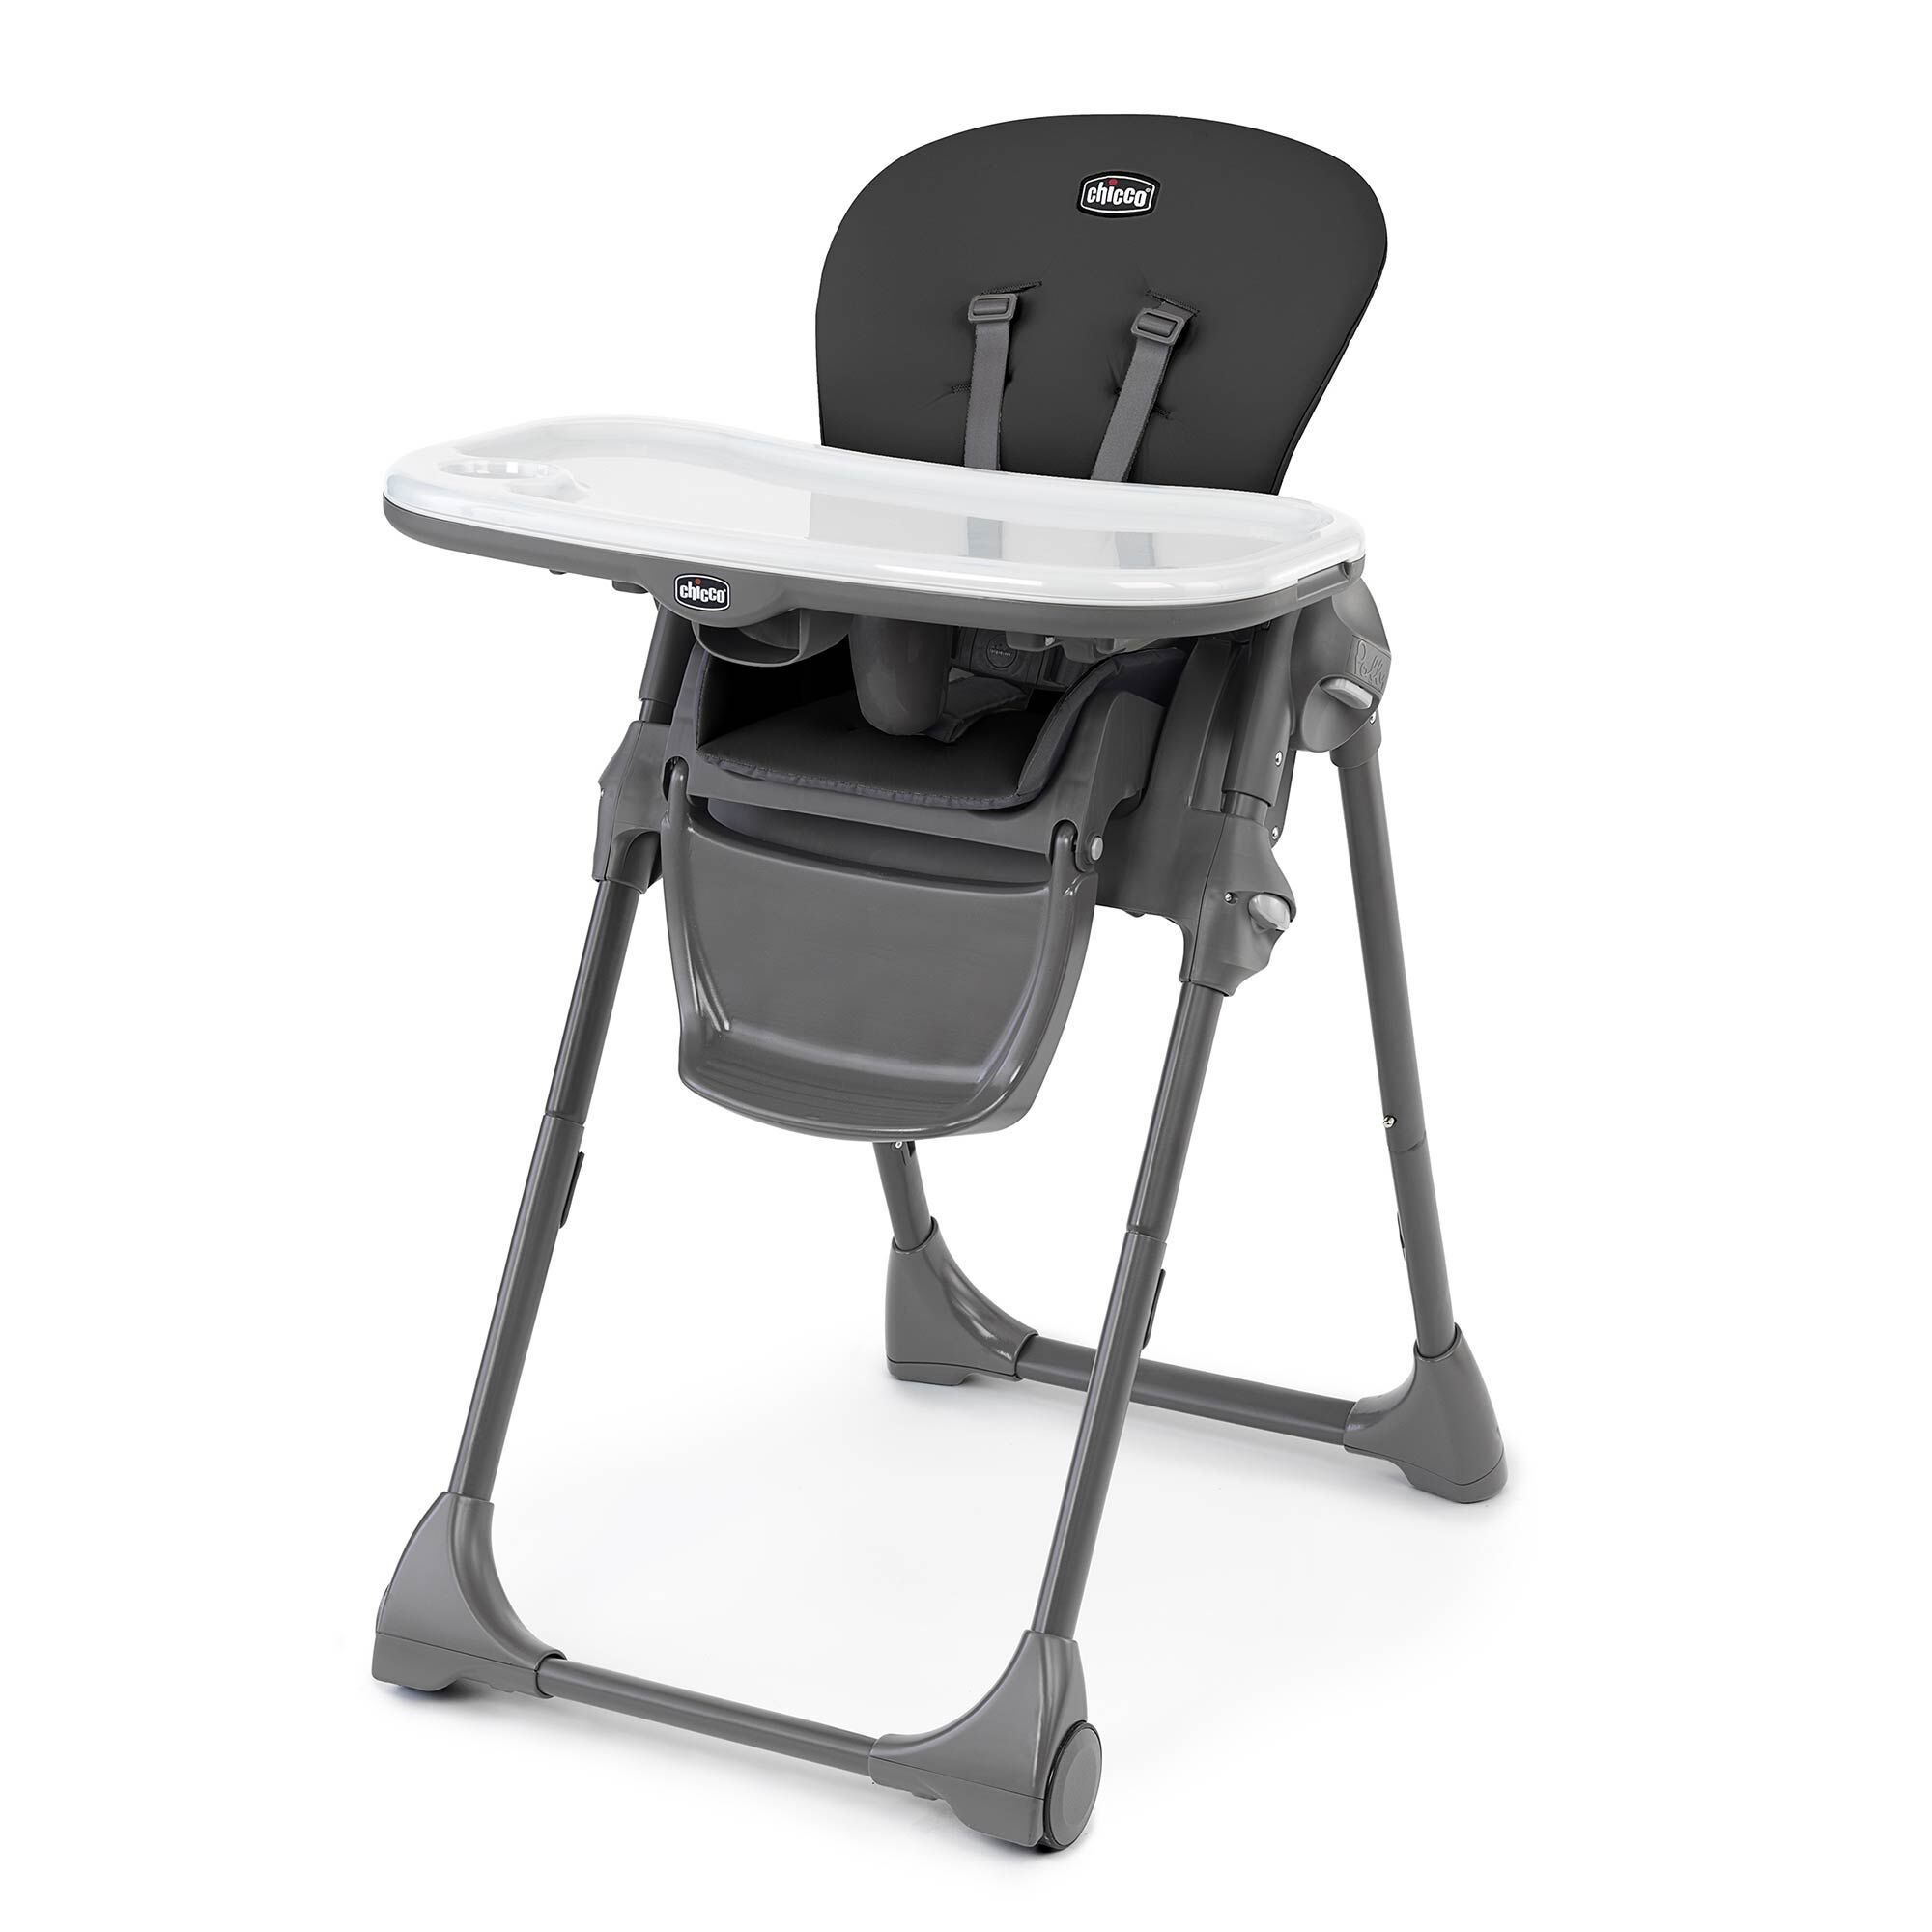 https://www.chiccousa.com/dw/image/v2/AAMT_PRD/on/demandware.static/-/Sites-chicco_catalog/default/dwec6a4417/images/products/Gear/polly/chicco-polly-highchair-black.jpg?sw=2000&sh=2000&sm=fit